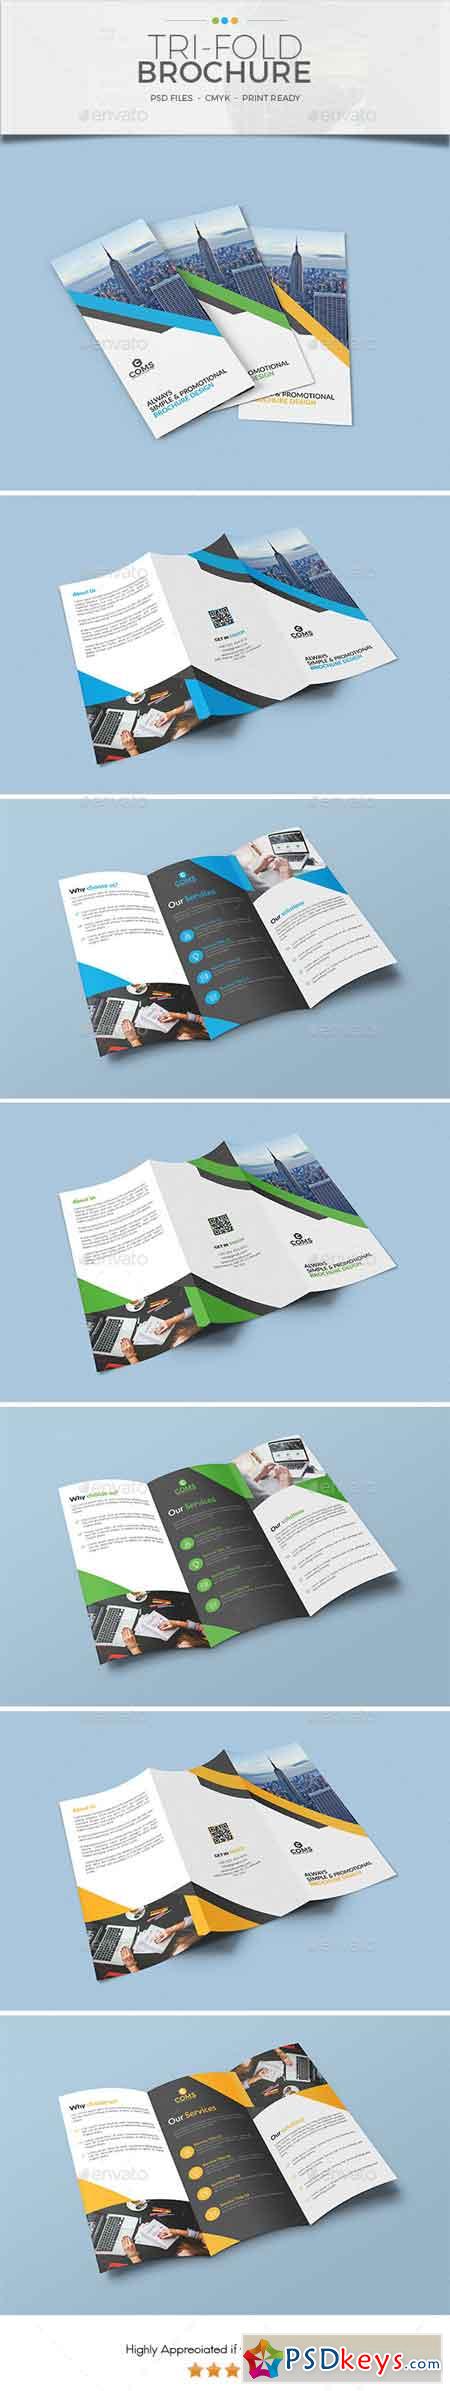 Trifold Brochure Template 16 20719864